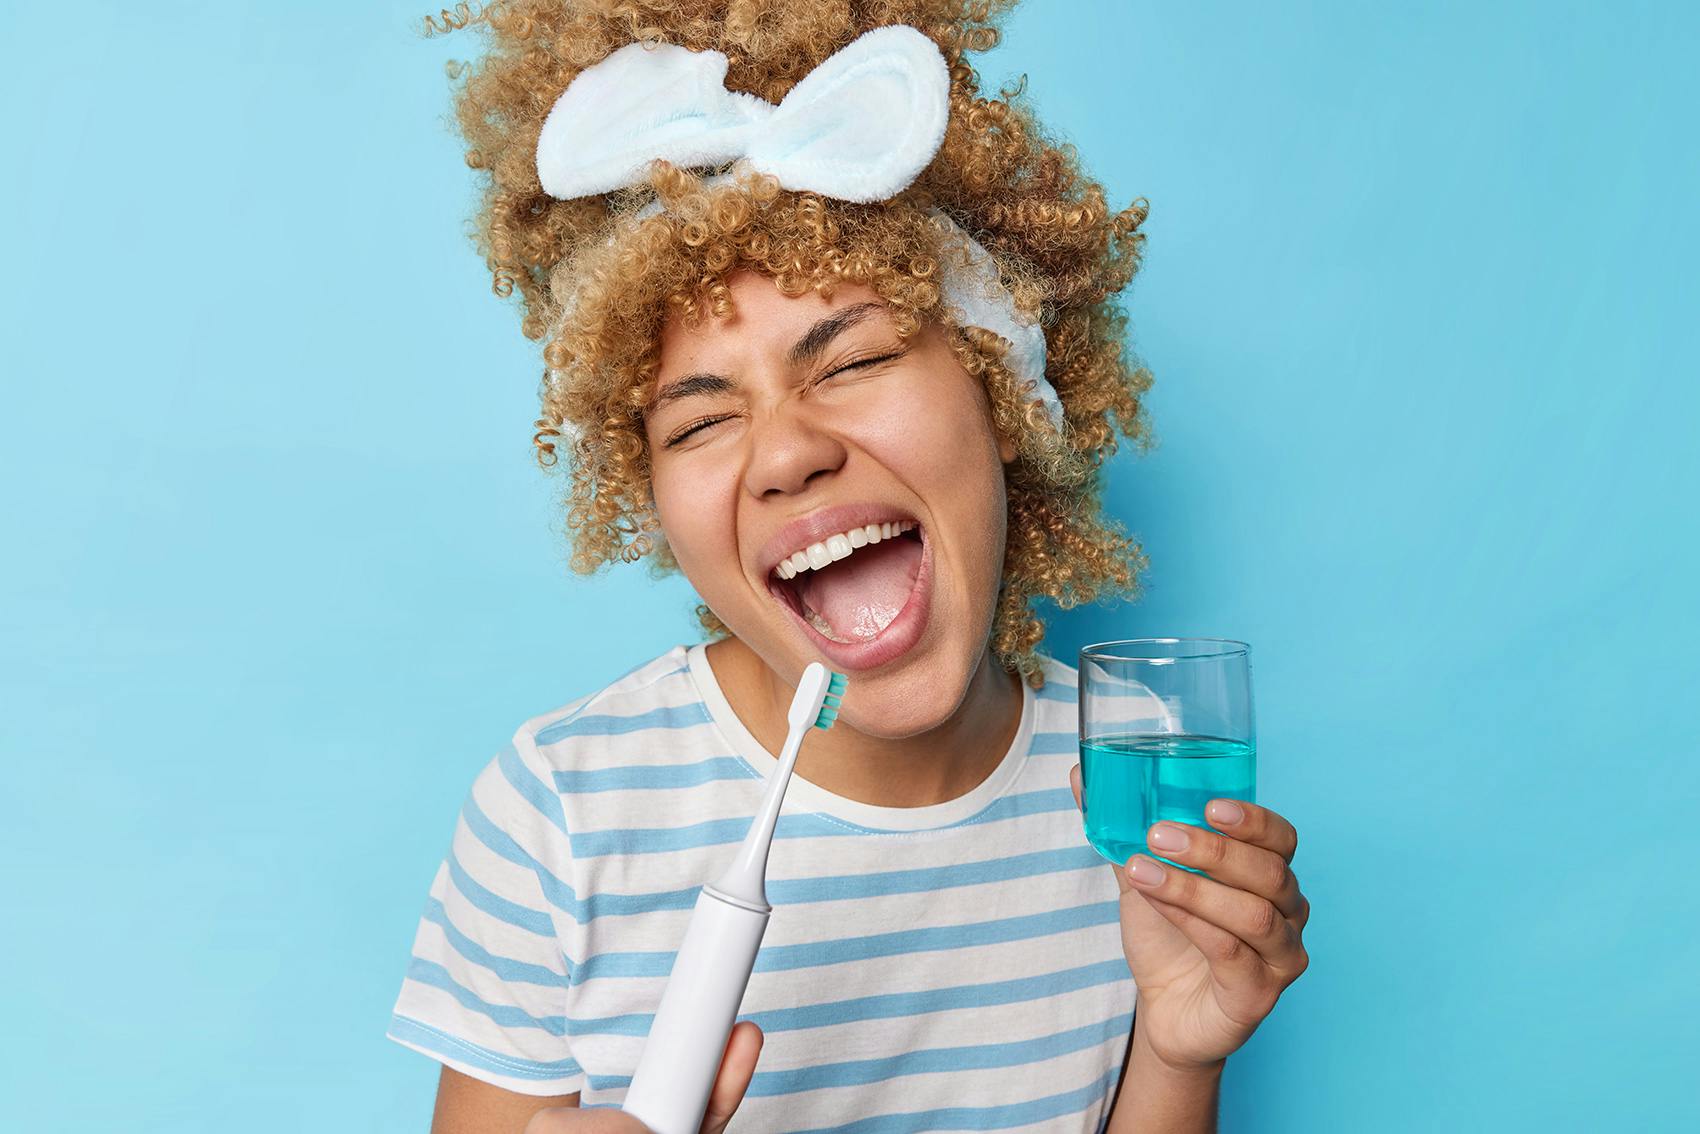 Smiling woman holding a toothbrush and a cup of mouthwash